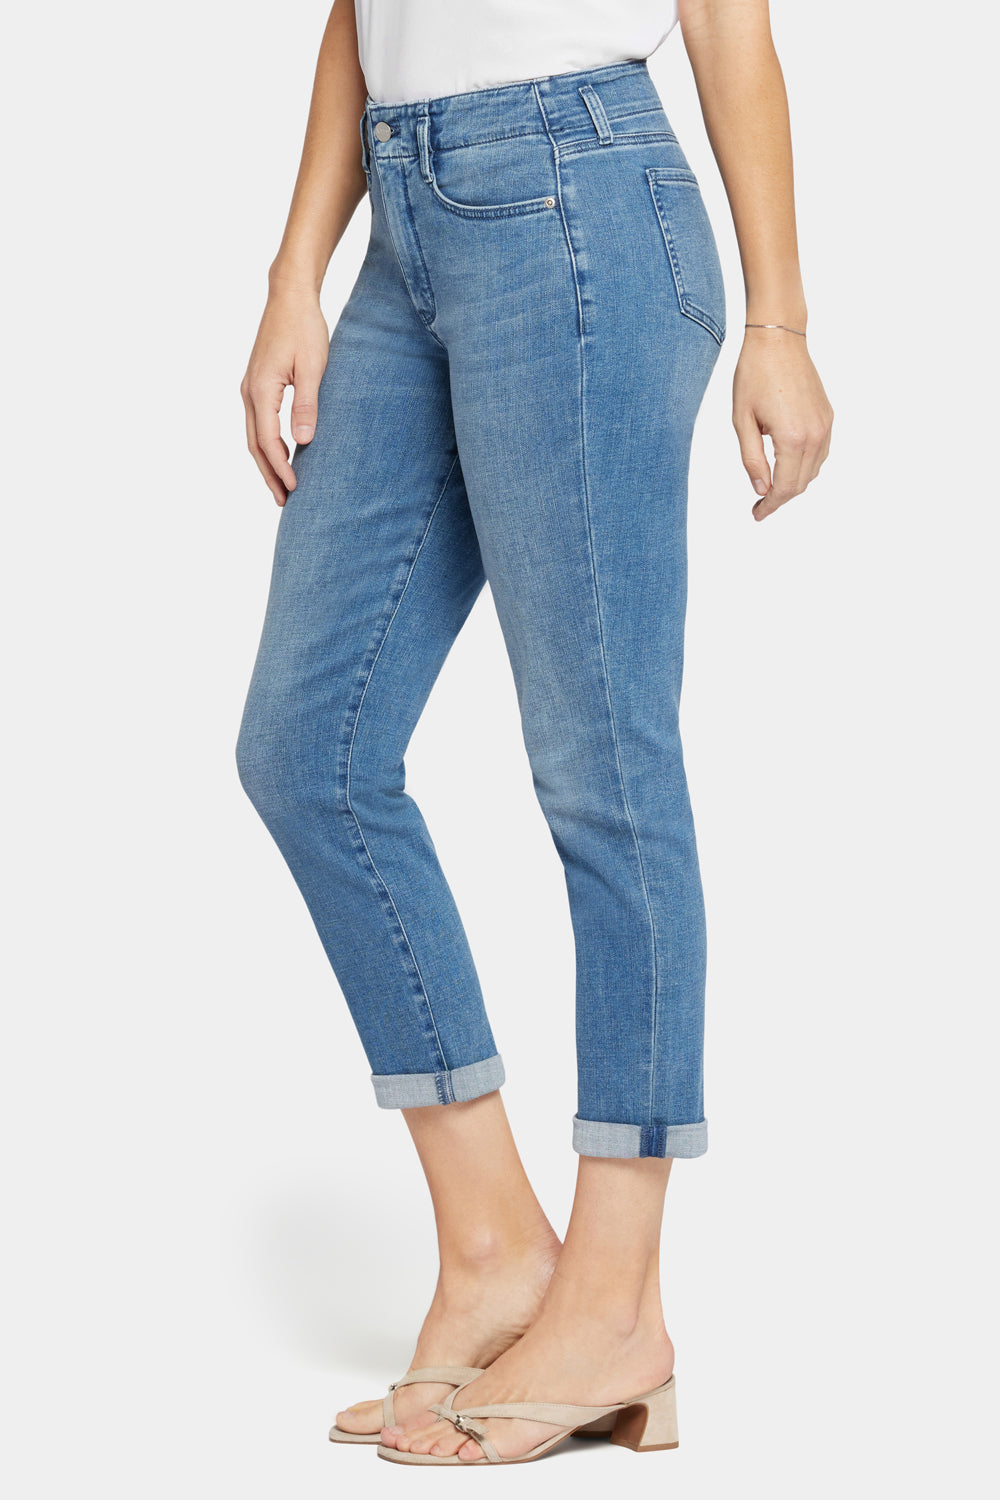 NYDJ Margot Girlfriend Jeans In Petite With High Rise - Stunning